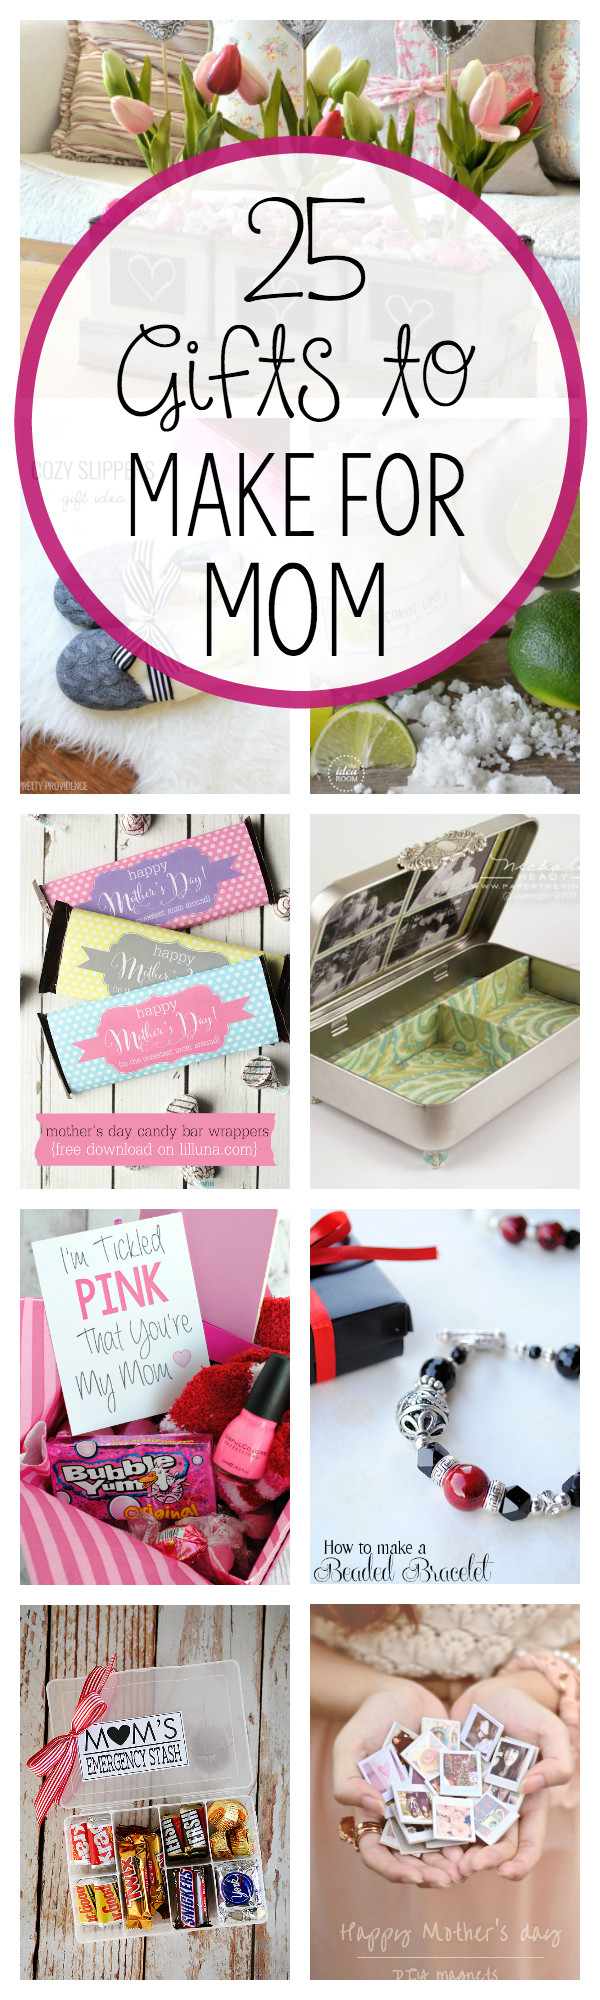 DIY Bday Gifts For Mom
 DIY Mother s Day Gift Ideas Crazy Little Projects